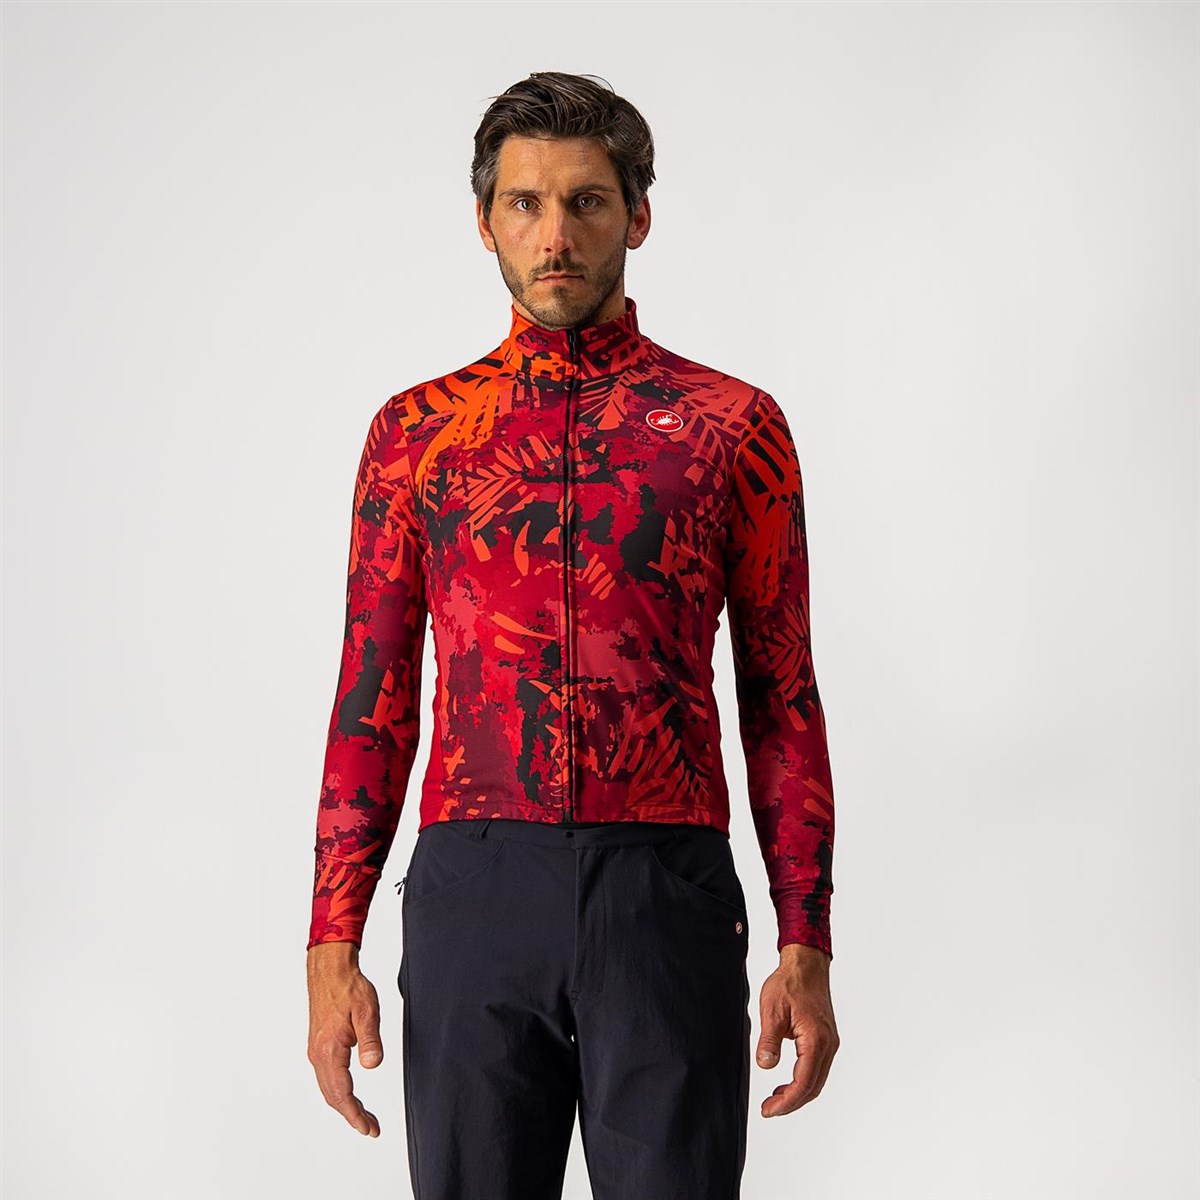 Castelli Unlimited Thermal Jersey product image